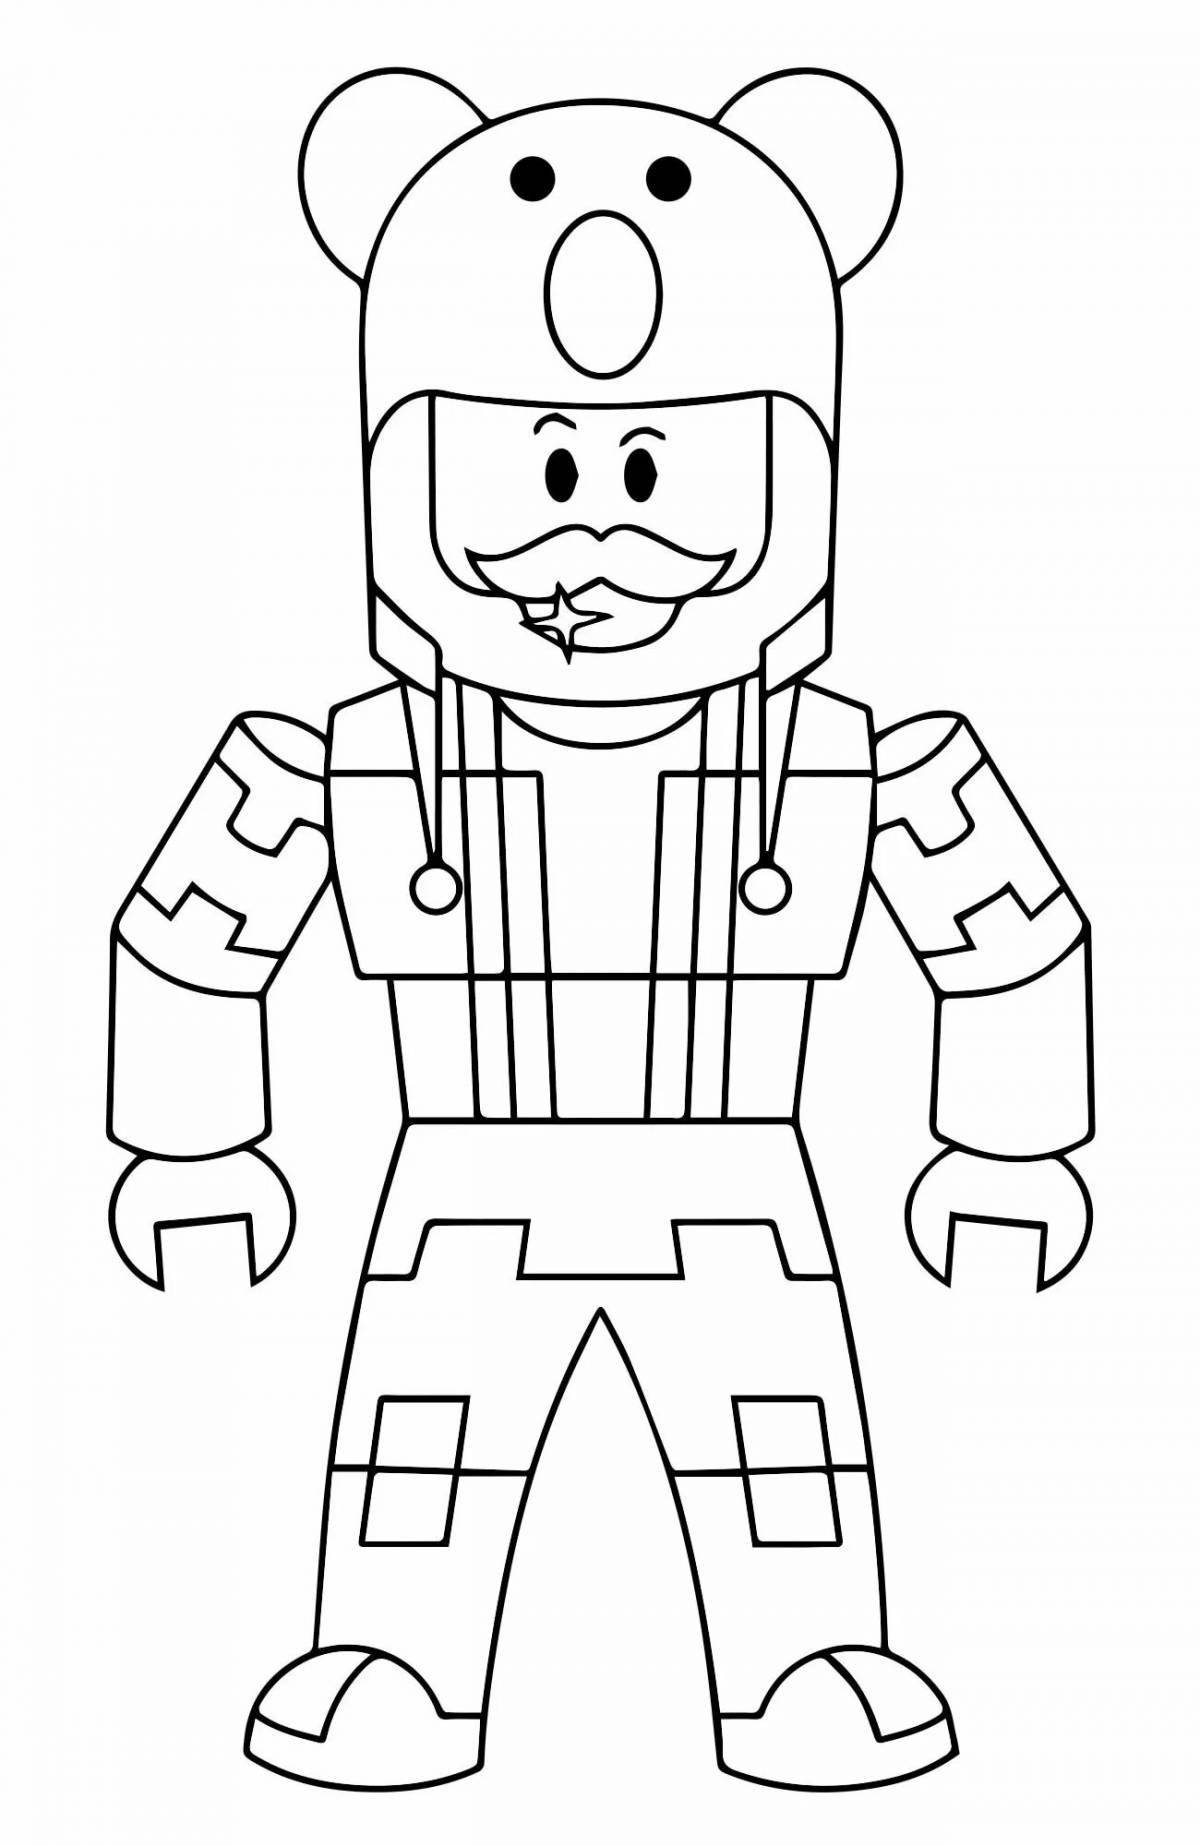 Robloxers live coloring book